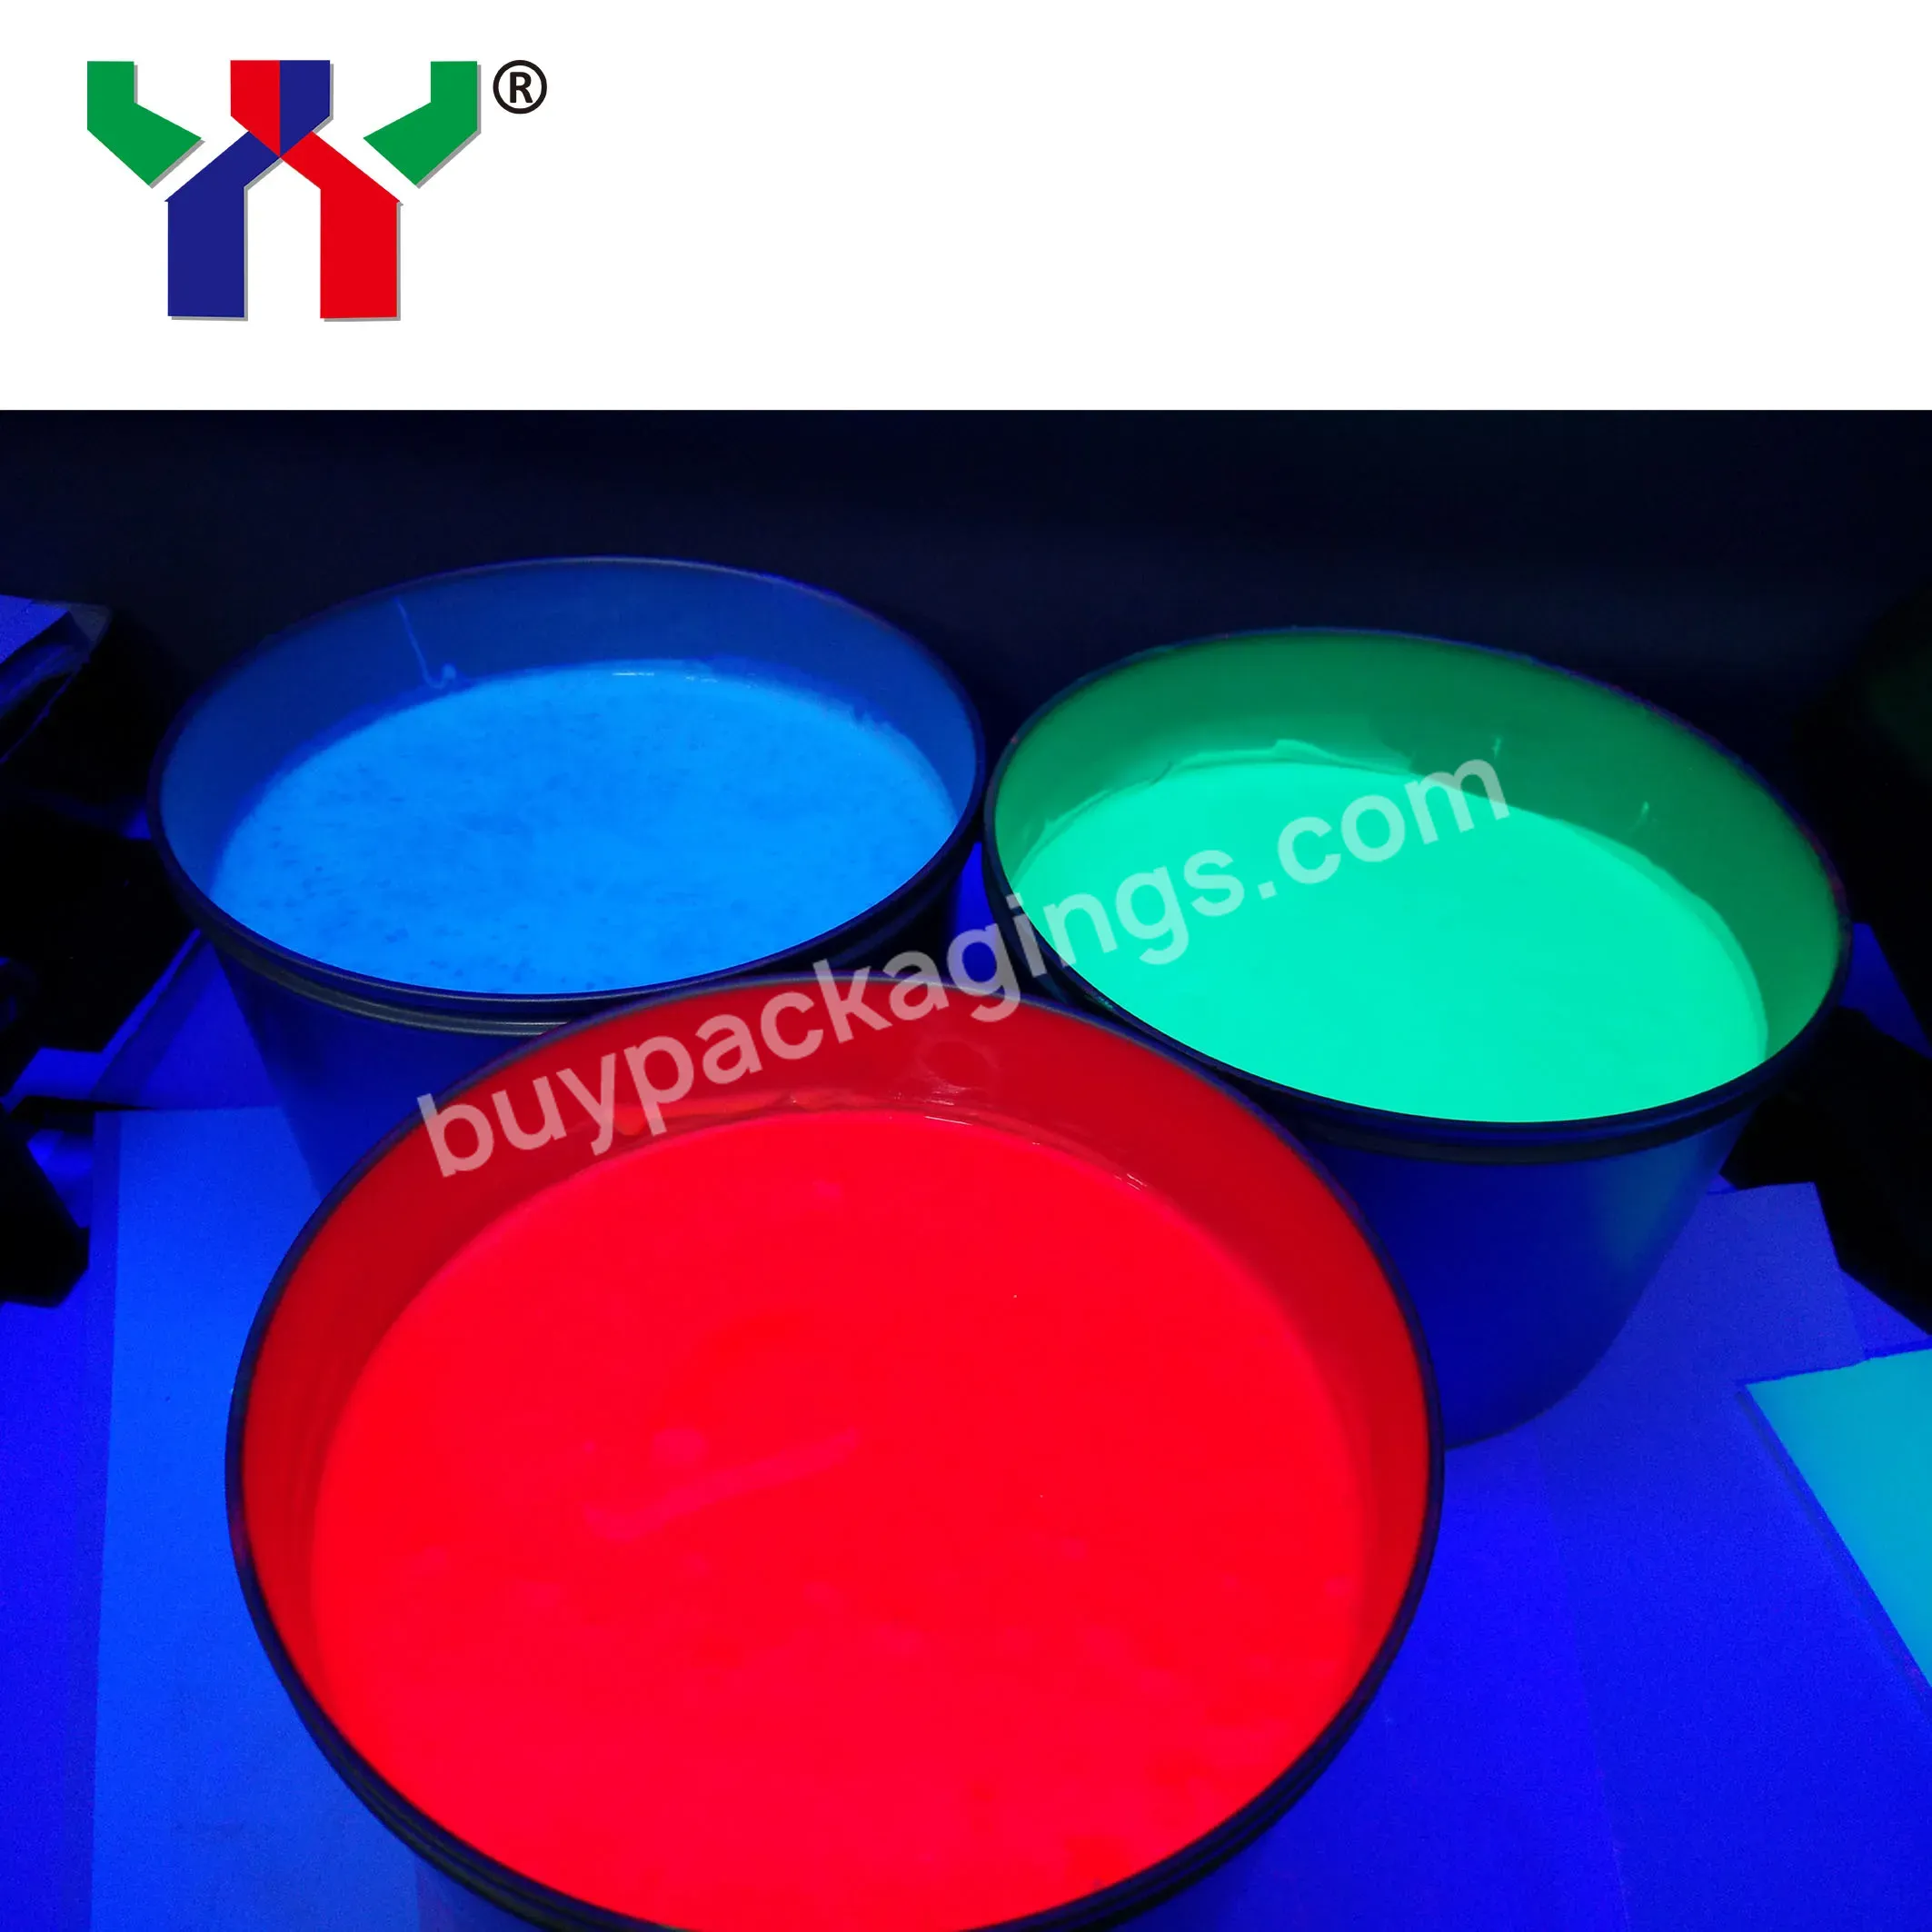 Screen Printing Uv Invisible Ink Colorless To Red,Air Dry,1kg/can - Buy Security Ink,Anti-counterfeiting Printing,Uv Invisible Ink.